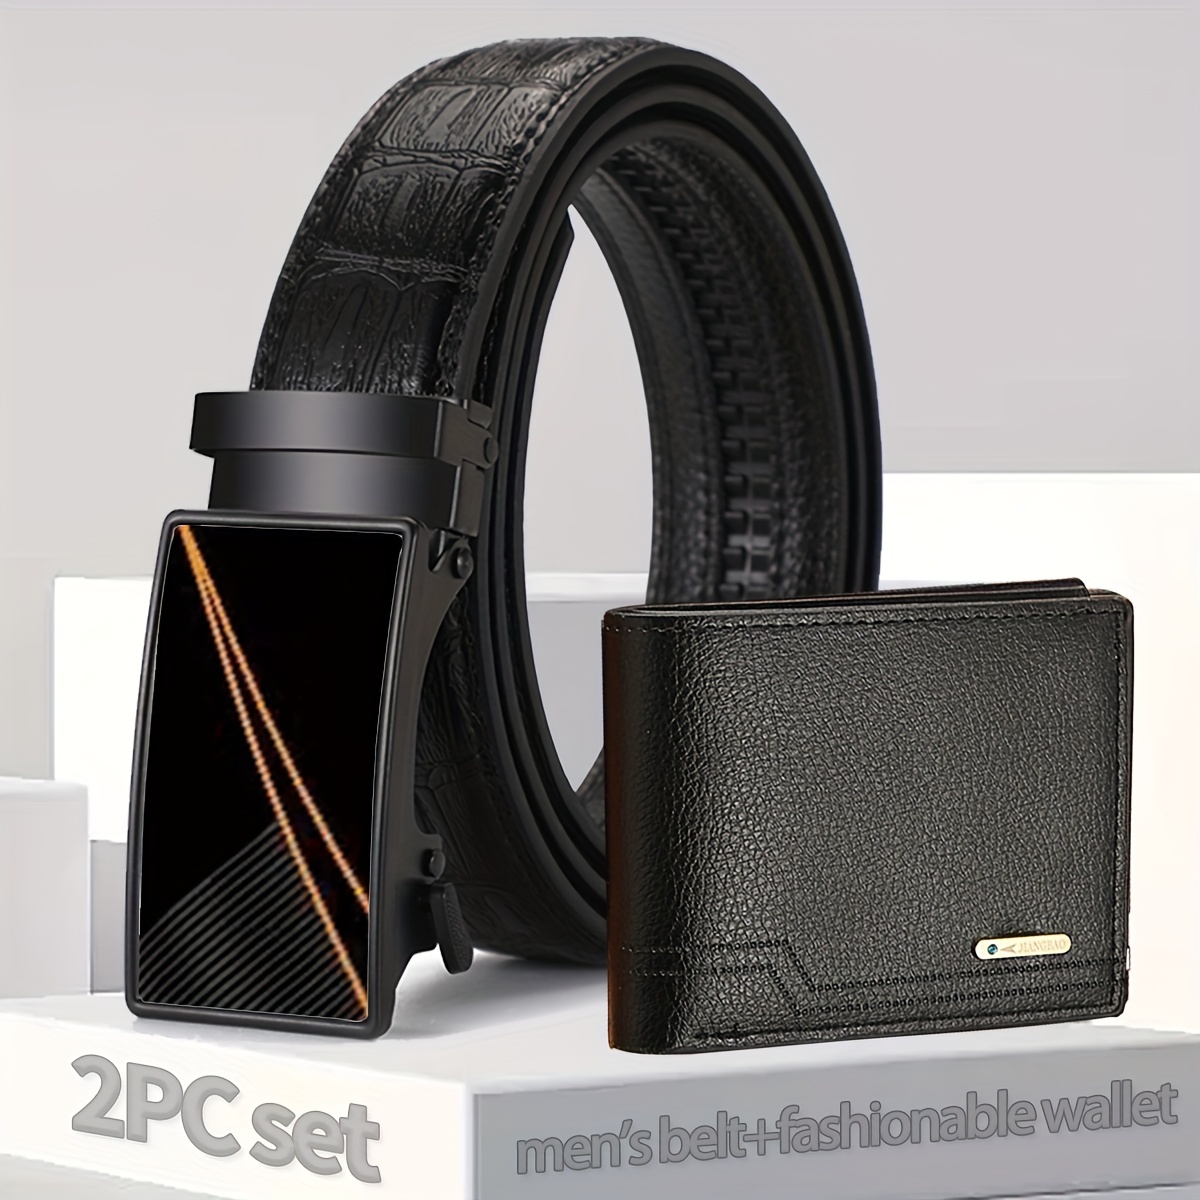 

2pcs Men's Pu Leather Belt + Wallet Set, Automatic Buckle Belt, For Boyfriend Dad Brother, Halloween Birthday Gift, Business Fashion Pants Belt (length Can Be Cut)